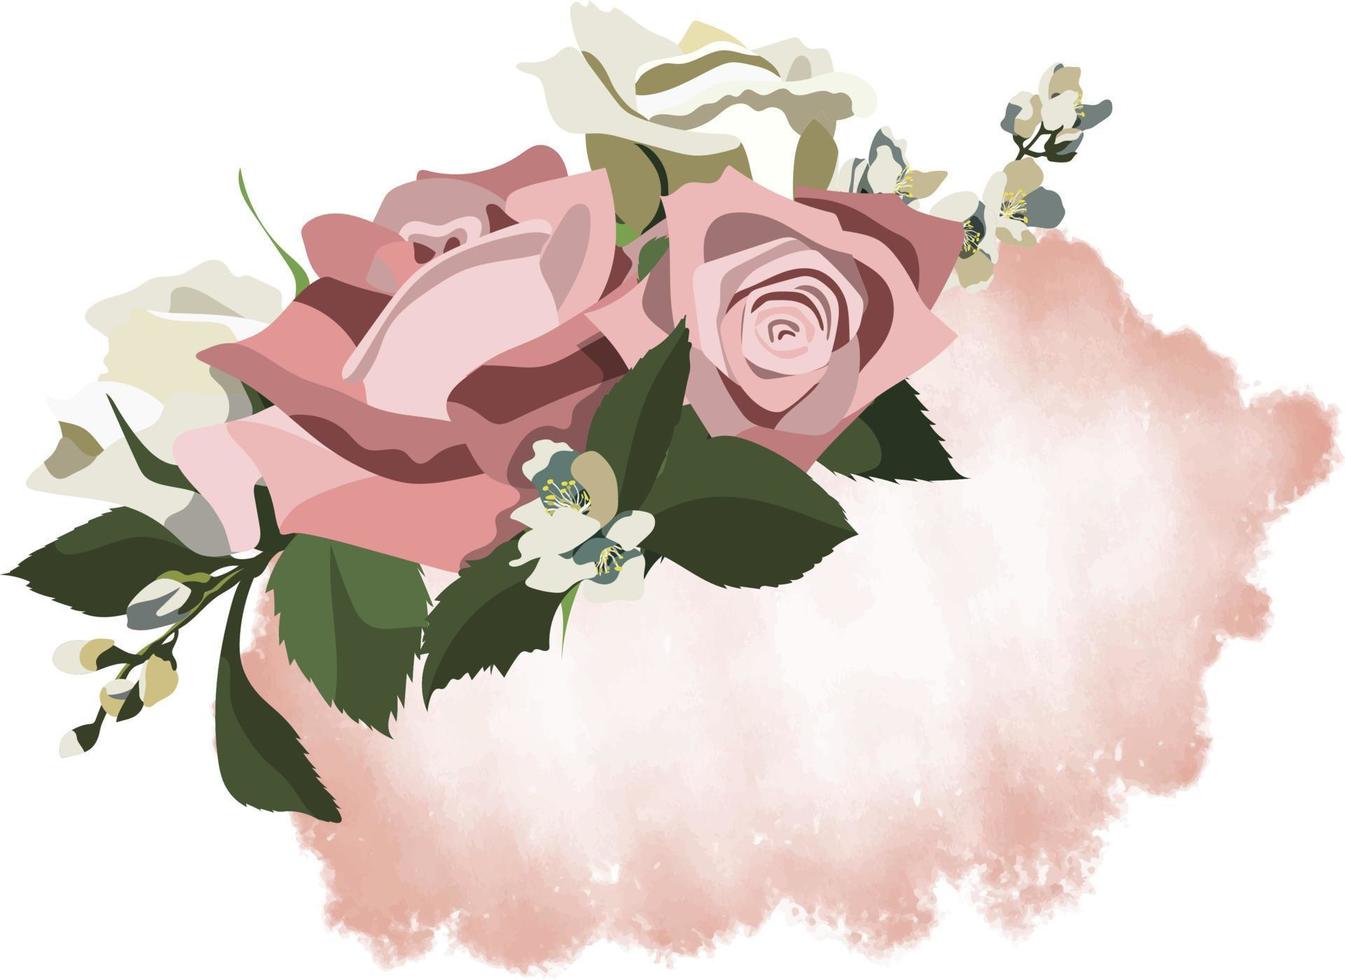 Floral template with white and pink roses, jasmine and greenery on watercolor styled pink background vector